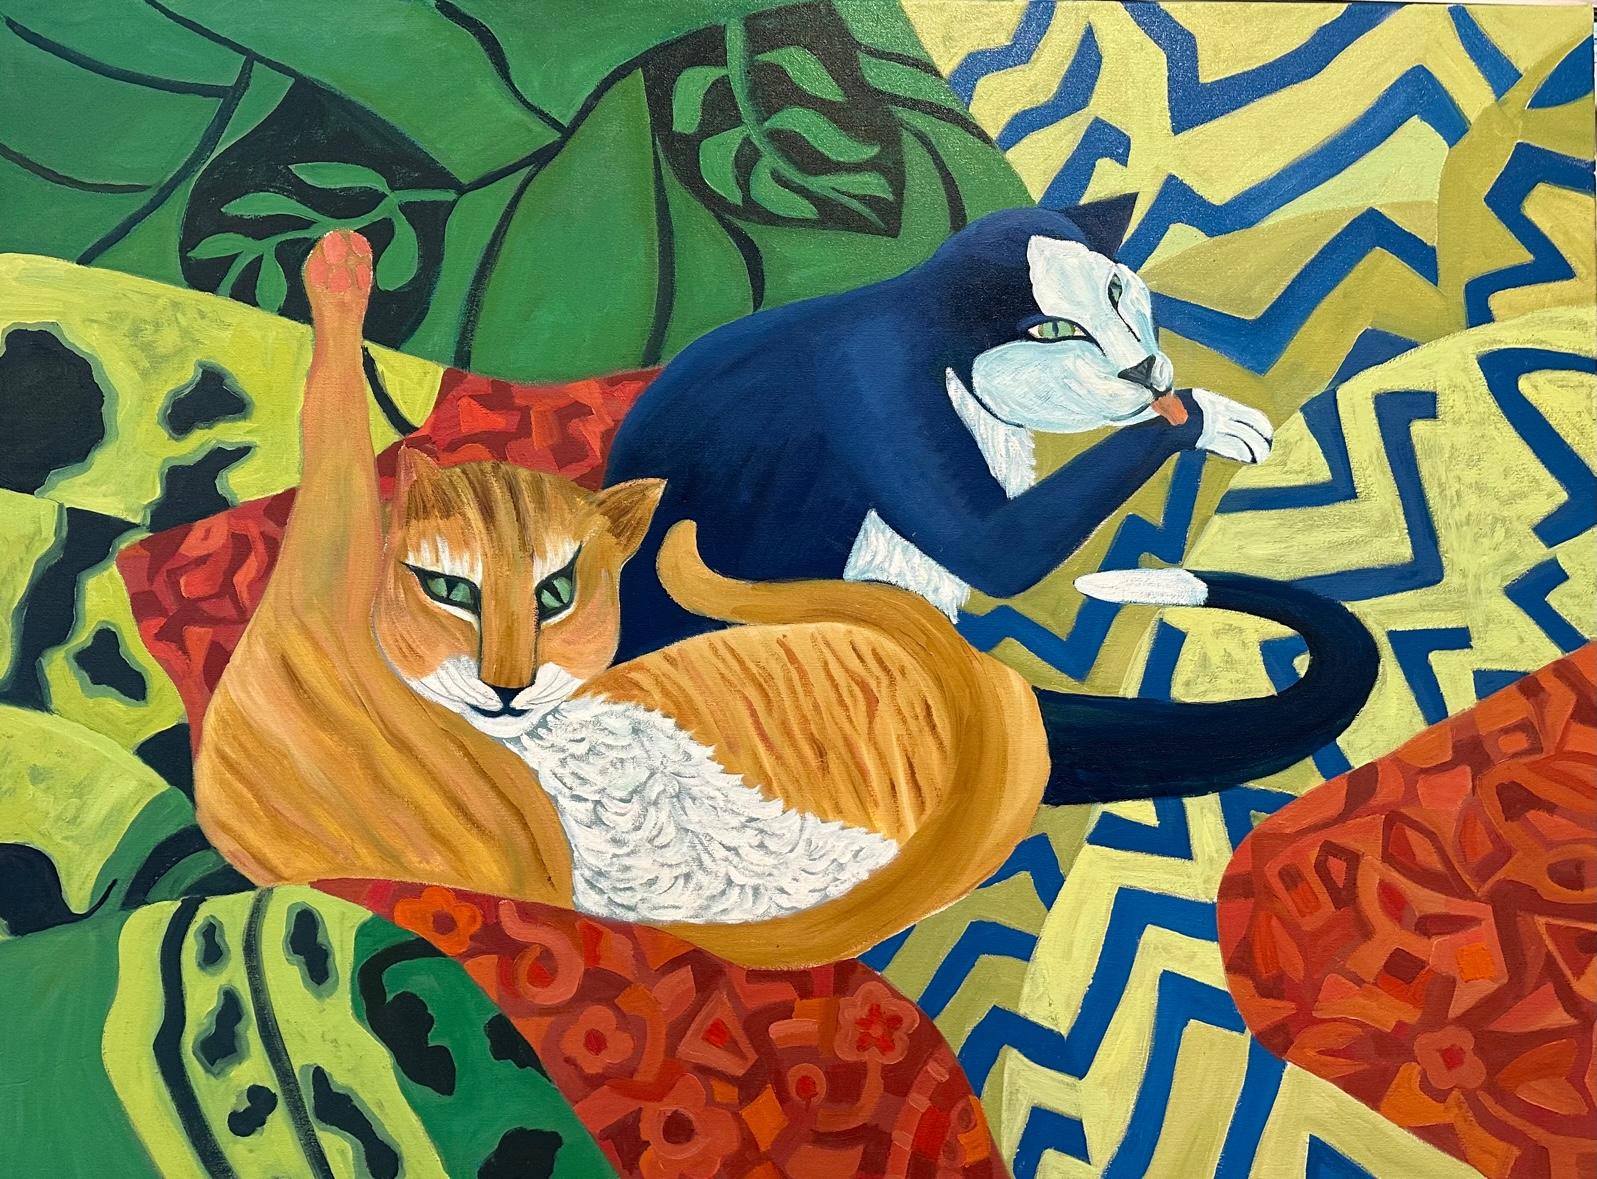 'Siesta' is a cheerful and lively painting that captures the playful and curious nature of cats in a beautiful setting.

The bright and vibrant colors could make any room feel more energetic and playful, and the cute and adorable depiction of the